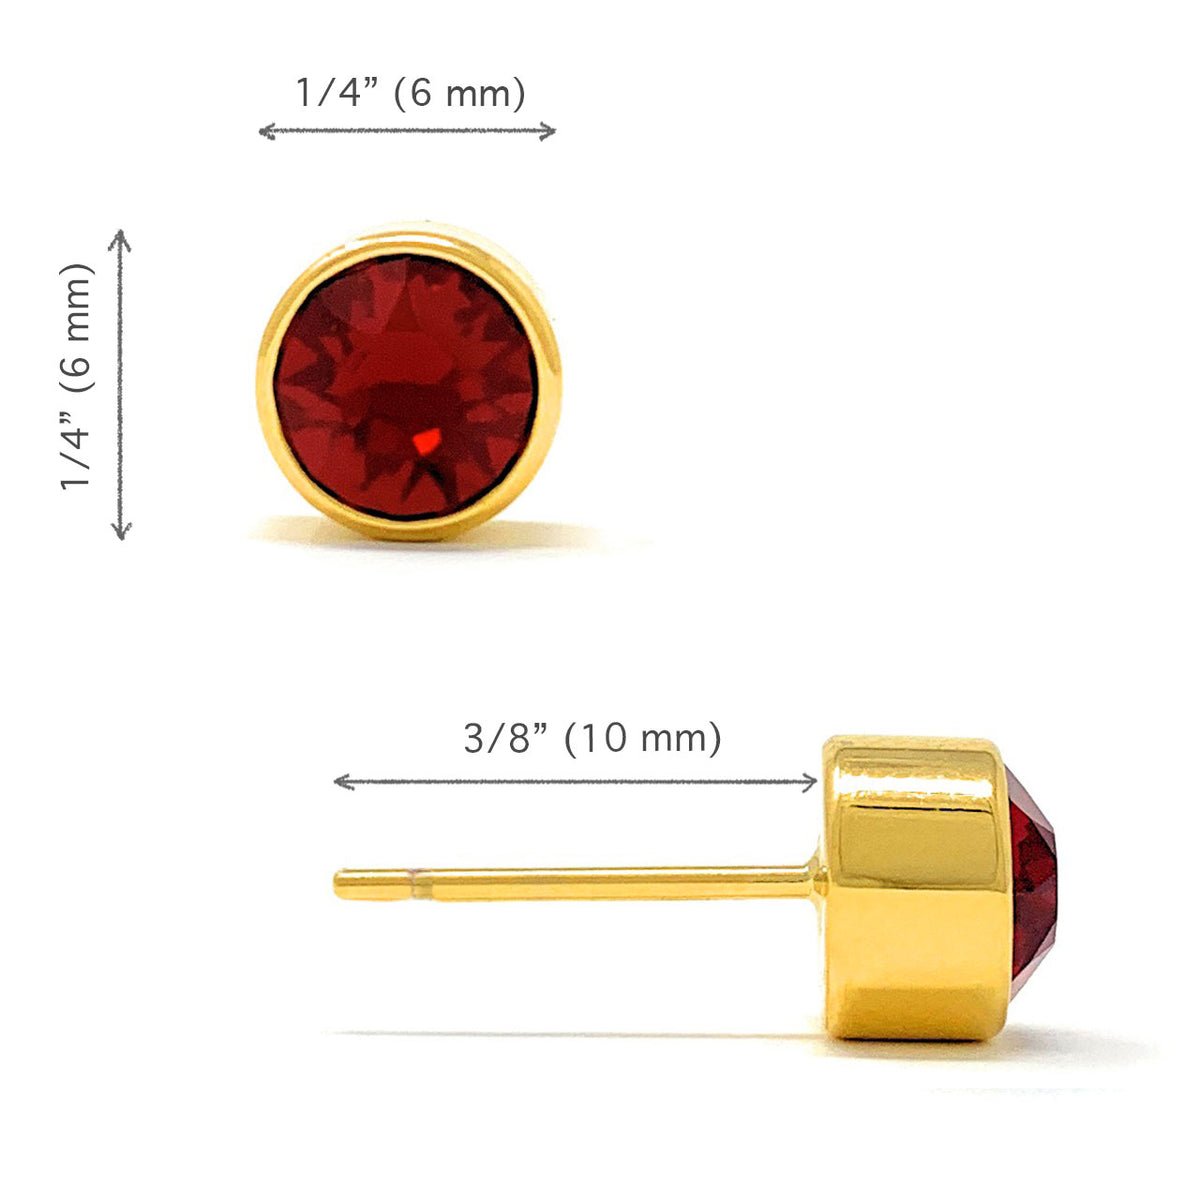 Harley Small Stud Earrings with Red Siam Round Crystals from Swarovski Gold Plated - Ed Heart